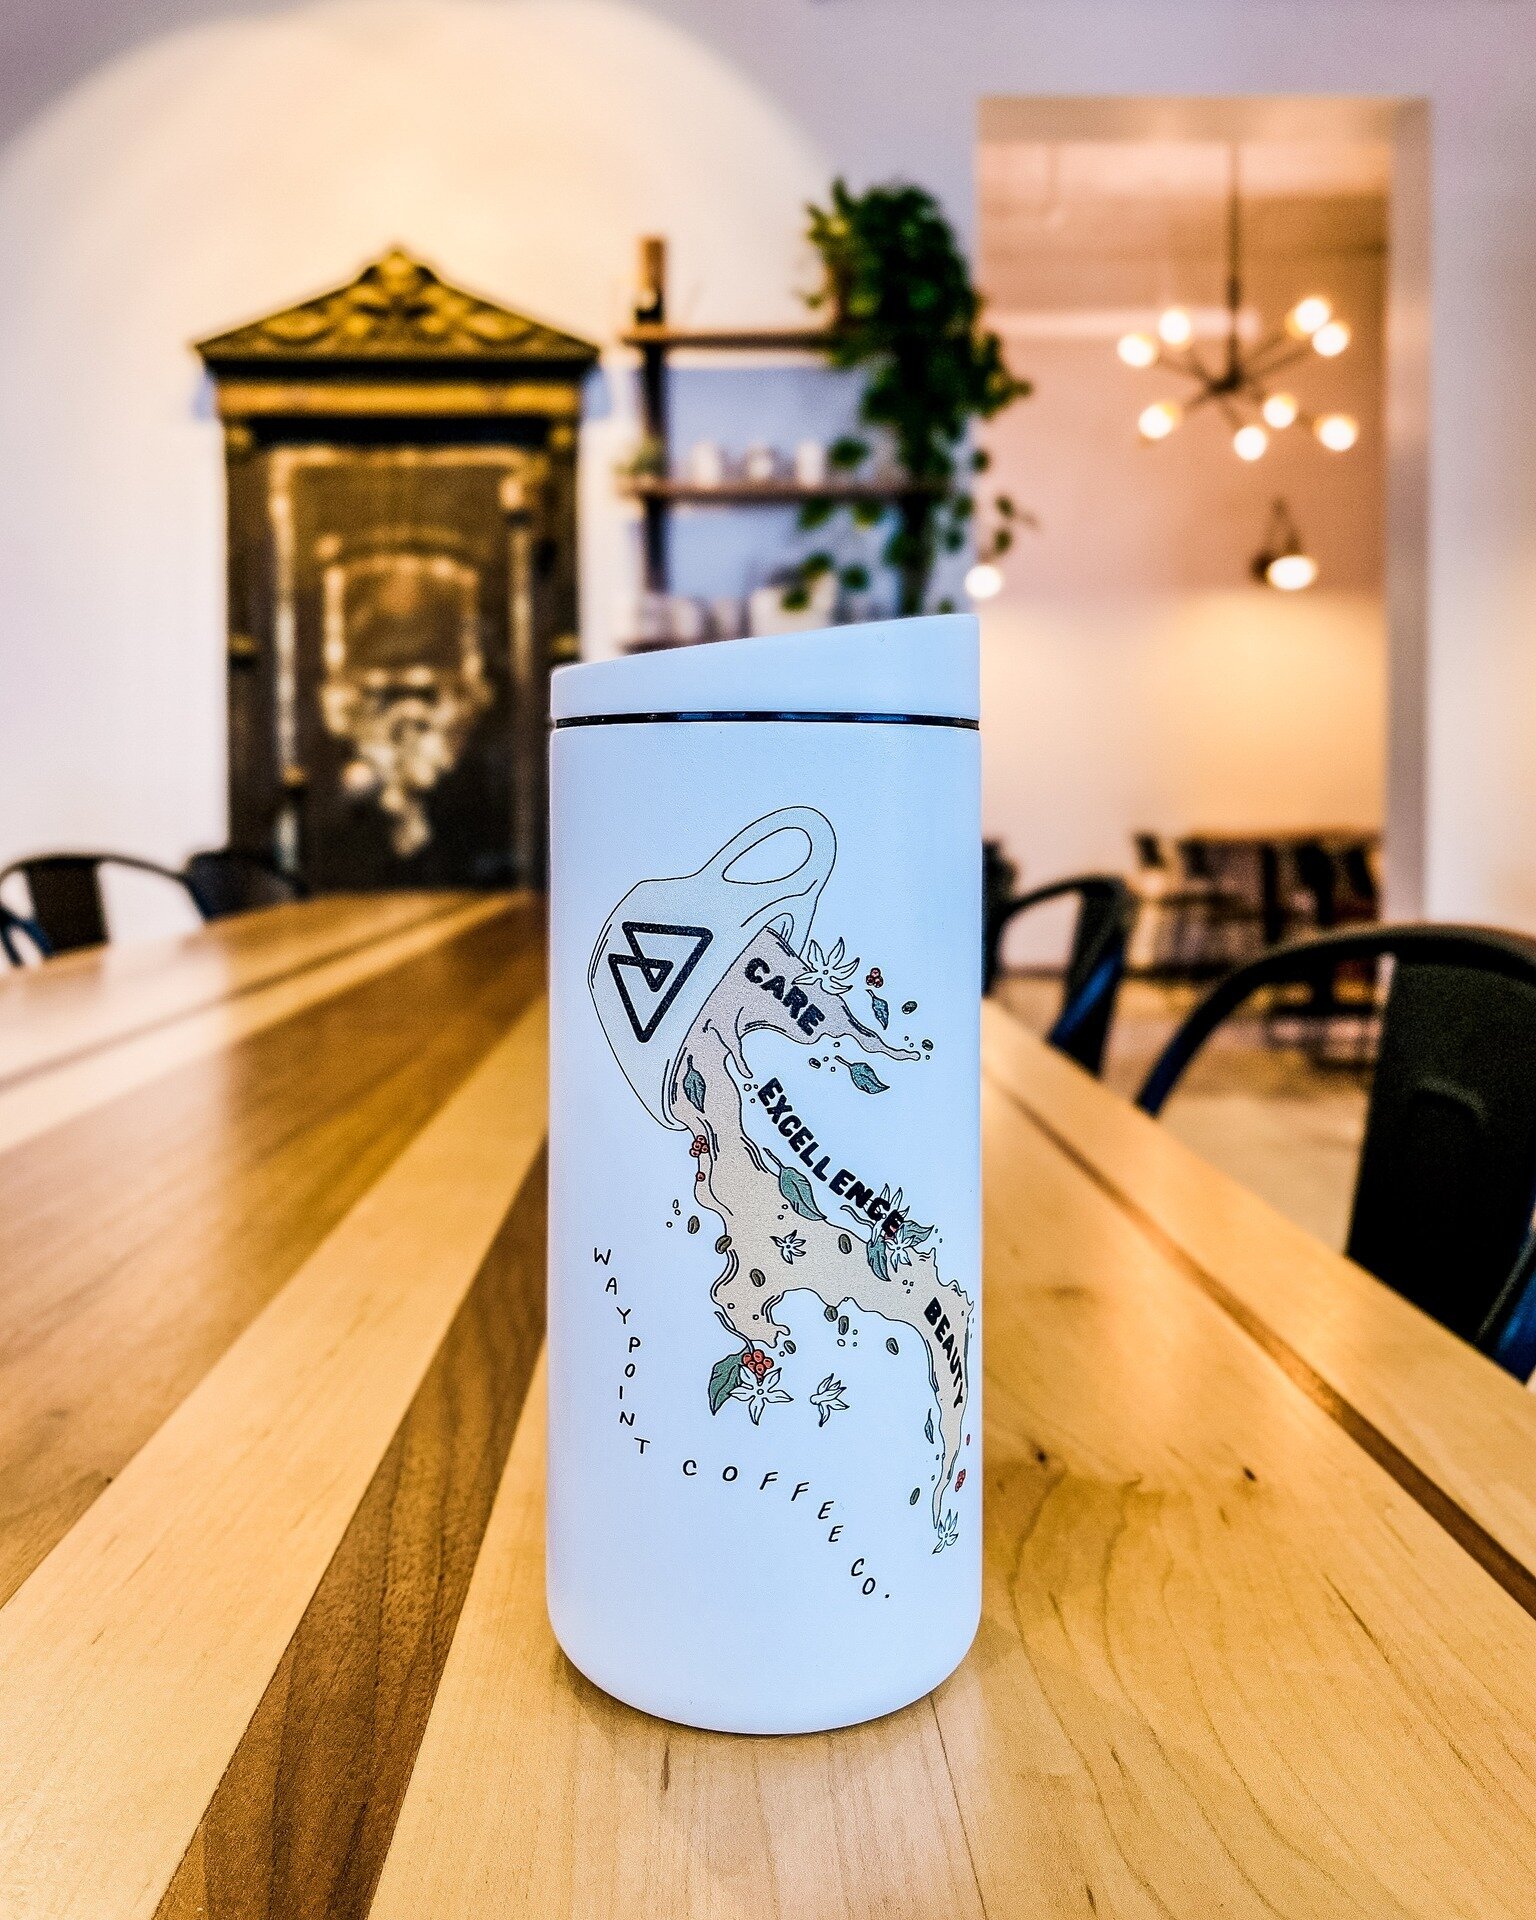 Tired of disposable cups and bottles cluttering up your life? Make the switch to the Miir Tumbler! Not only is it eco-friendly, but its insulated design keeps your drinks hot or cold for hours. Plus, with its modern design and eye-catching colors, yo